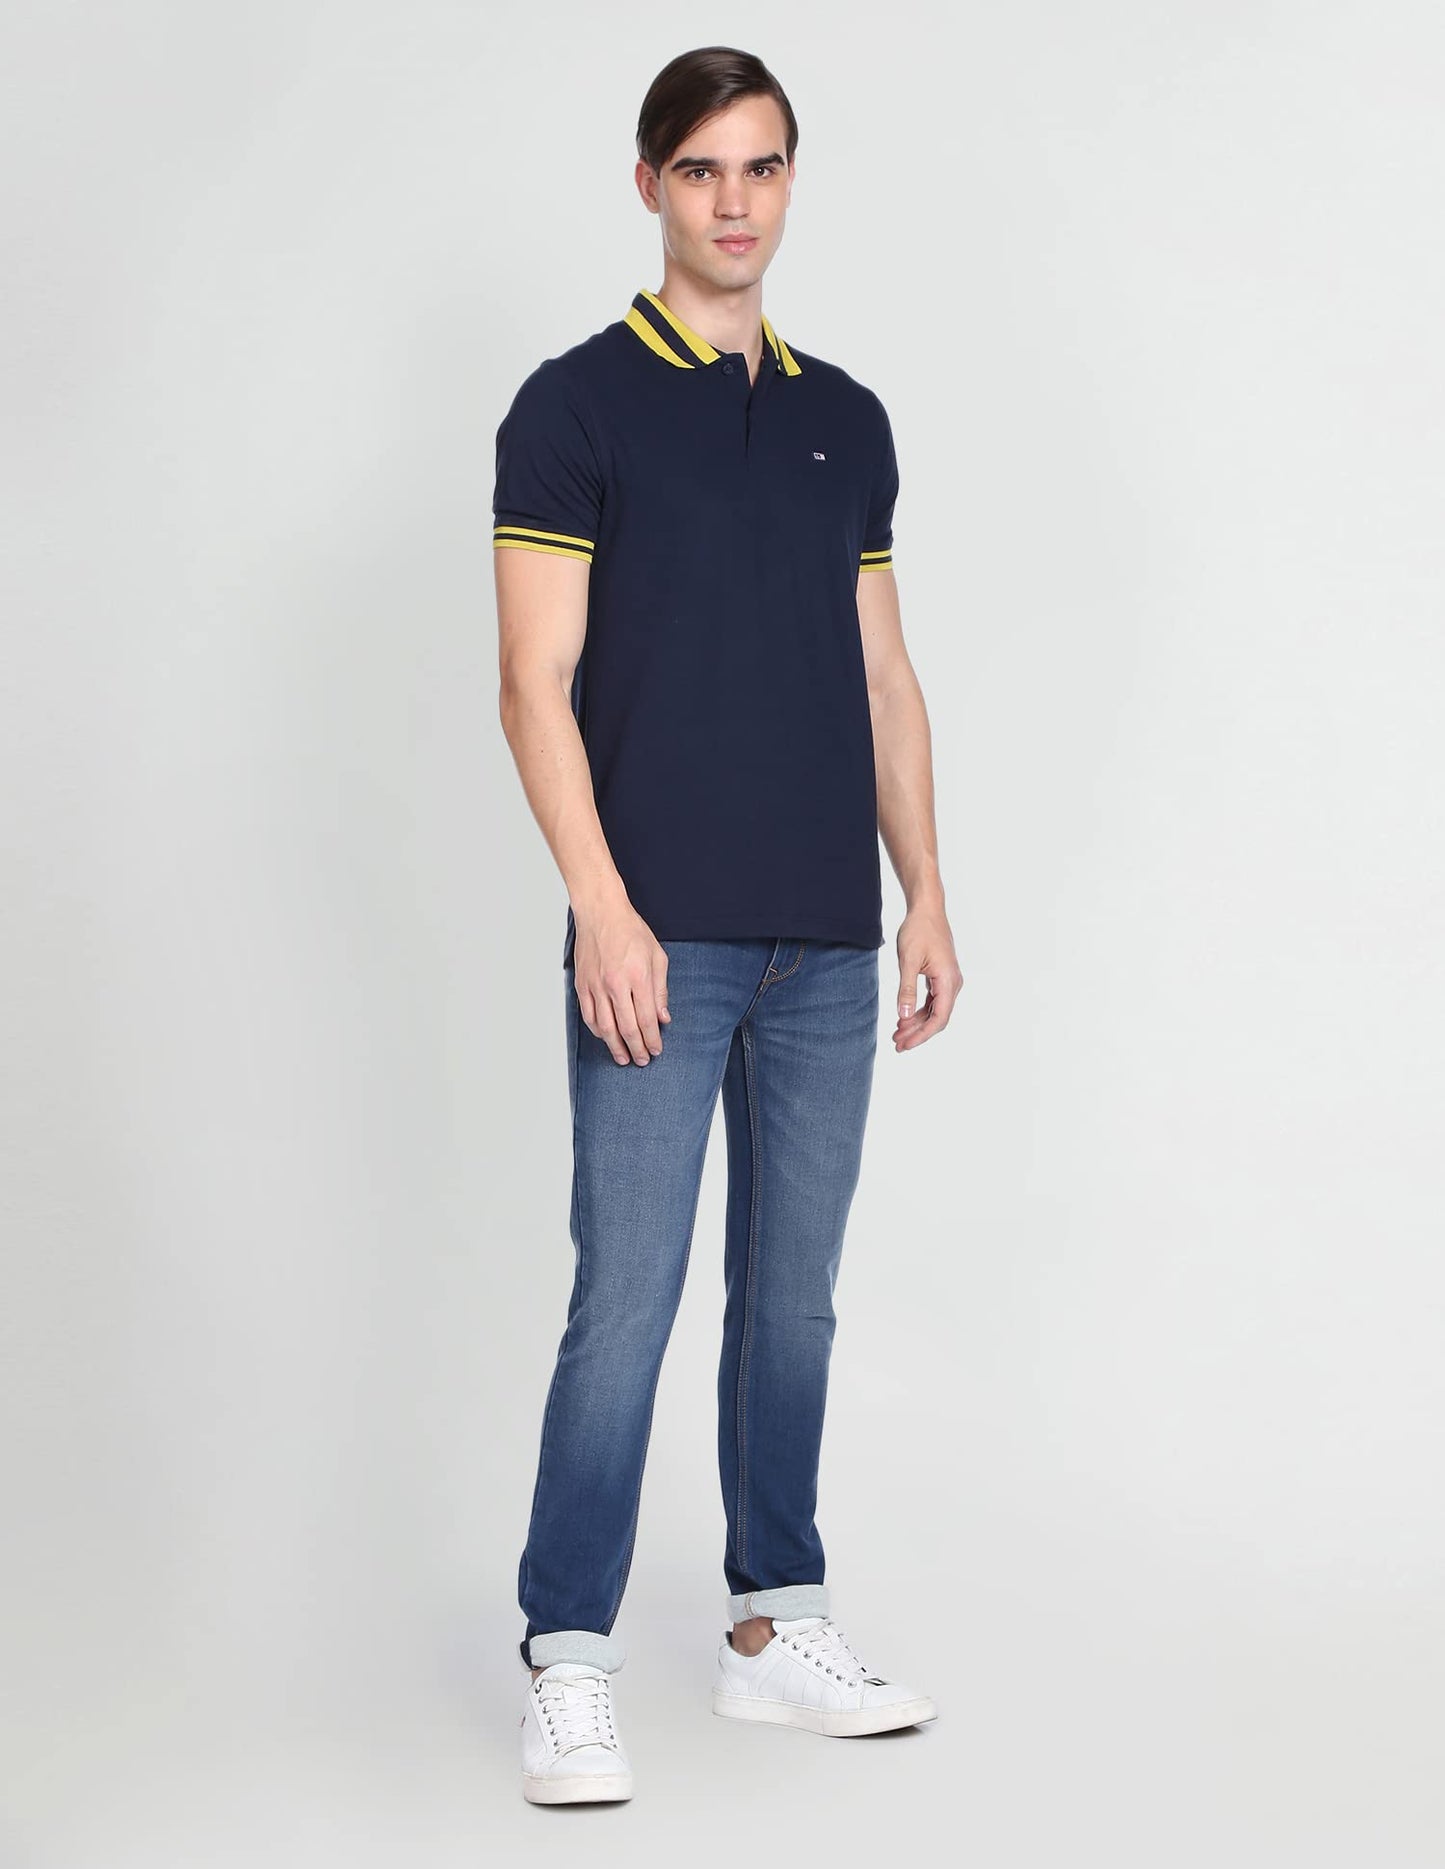 Arrow Sports Navy Solid Polo T-Shirt (ASAEOTS3824_M) 